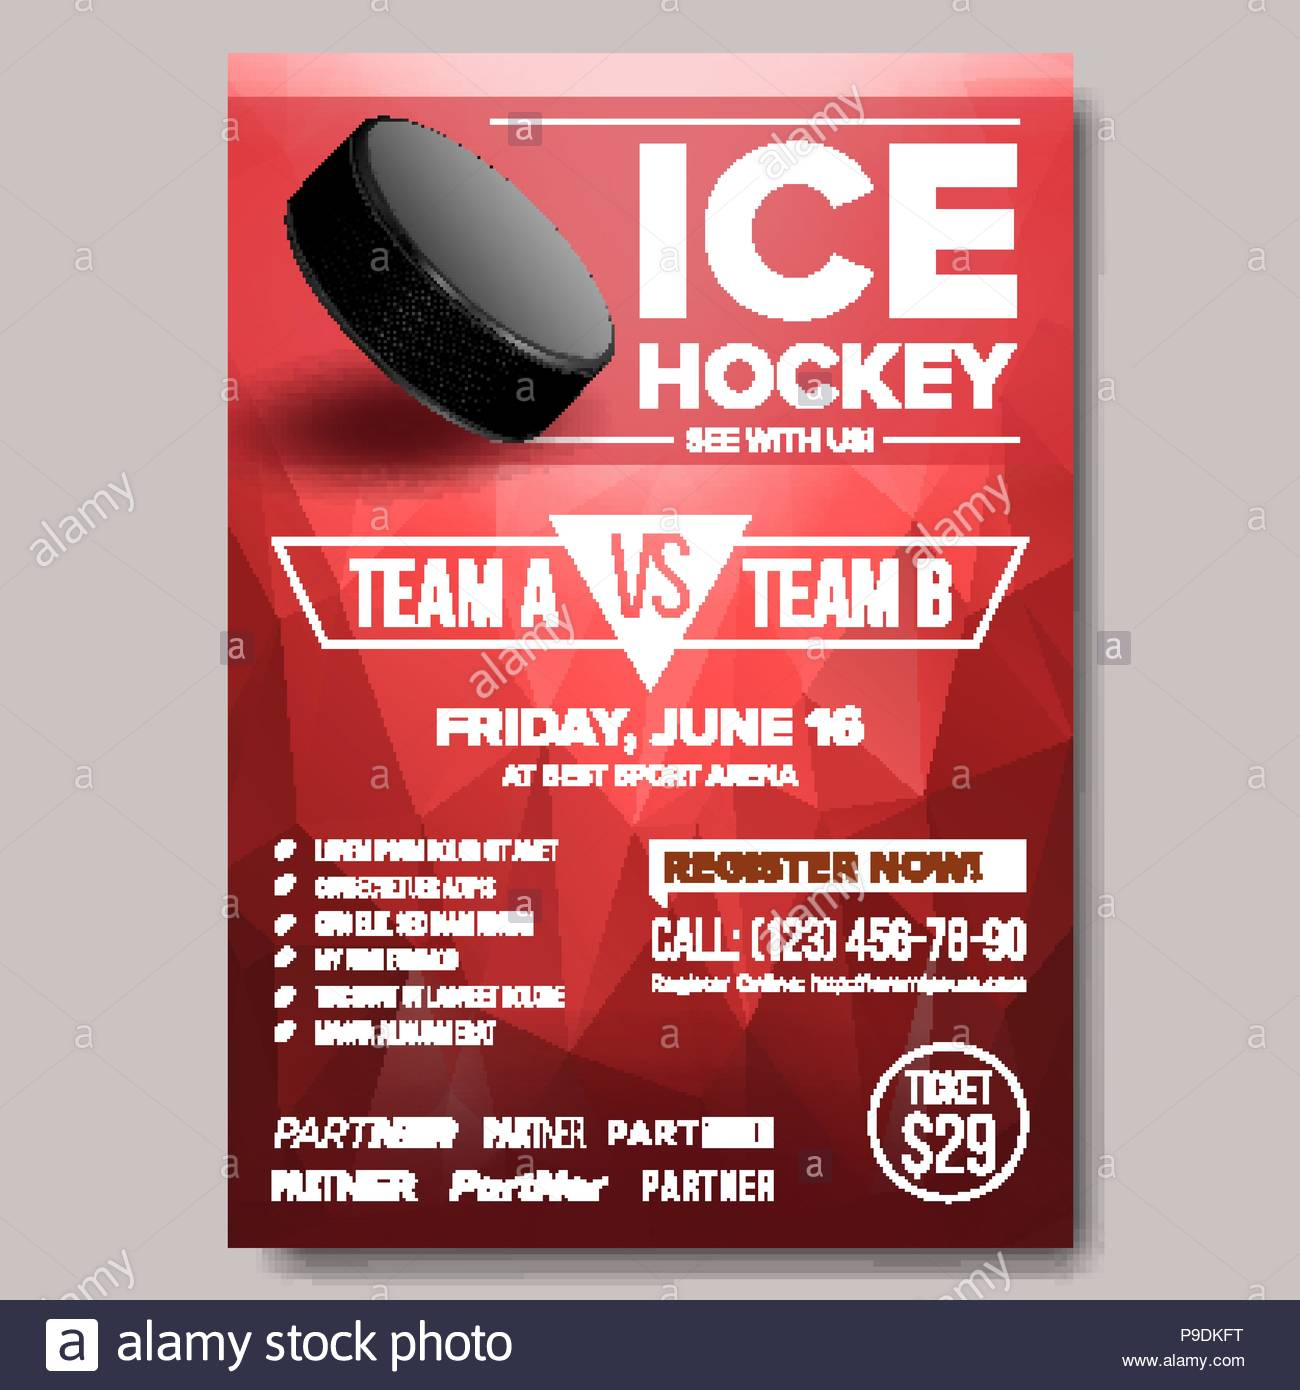 Ice Hockey Poster Vector. Ice Hockey Puck. Vertical Design Pertaining To Hockey Flyer Template